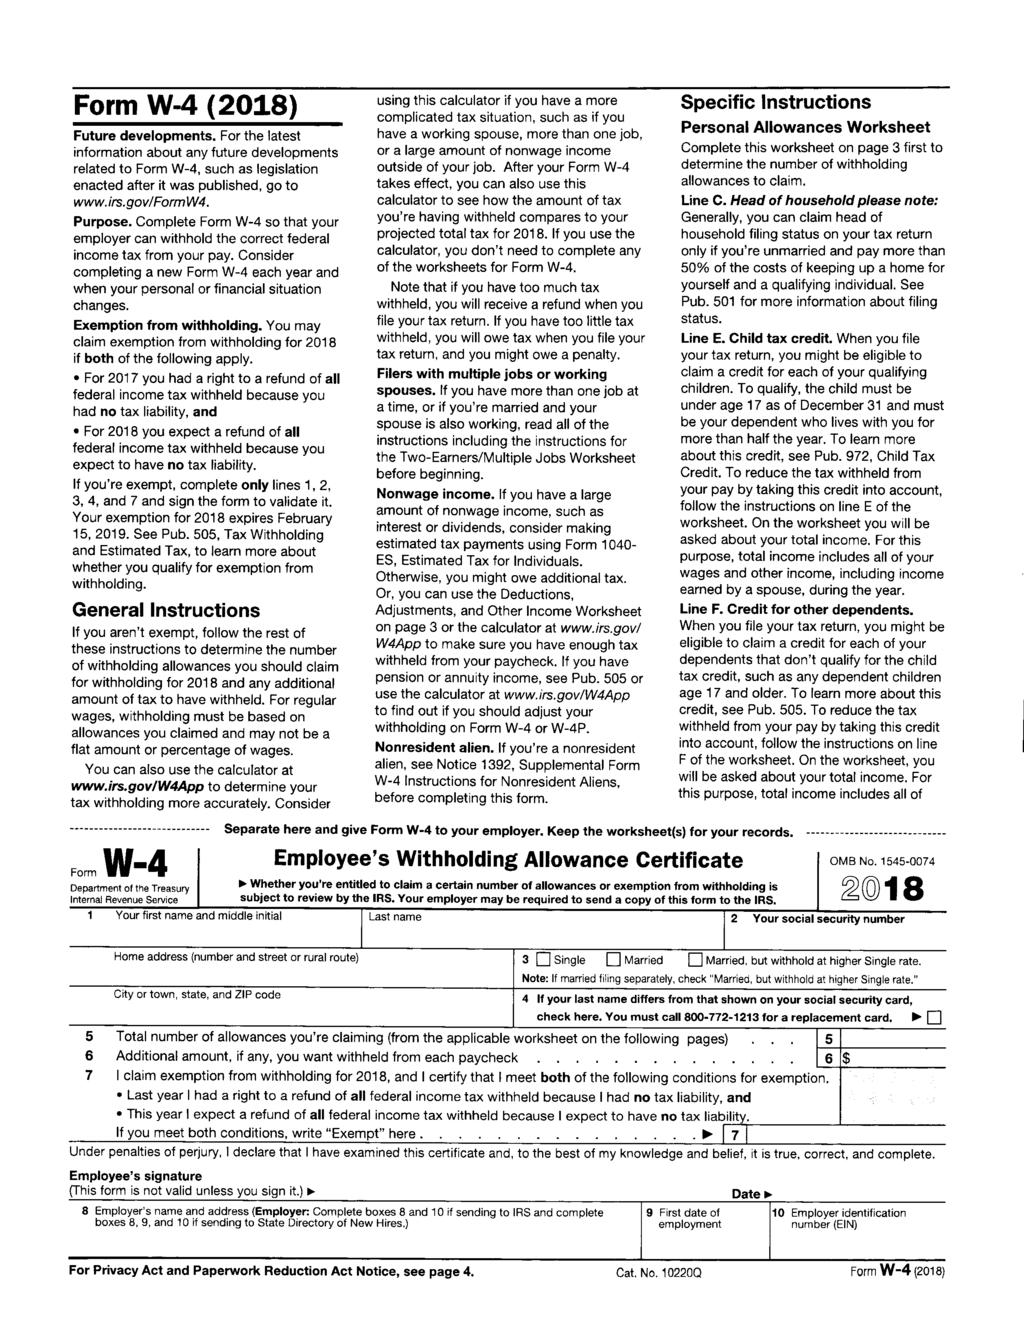 Form W-4 (2018) Future developments. For the latest information about any future developments related to Form W-4, such as legislation enacted after it was published, go to www.irs.gov/formw4.